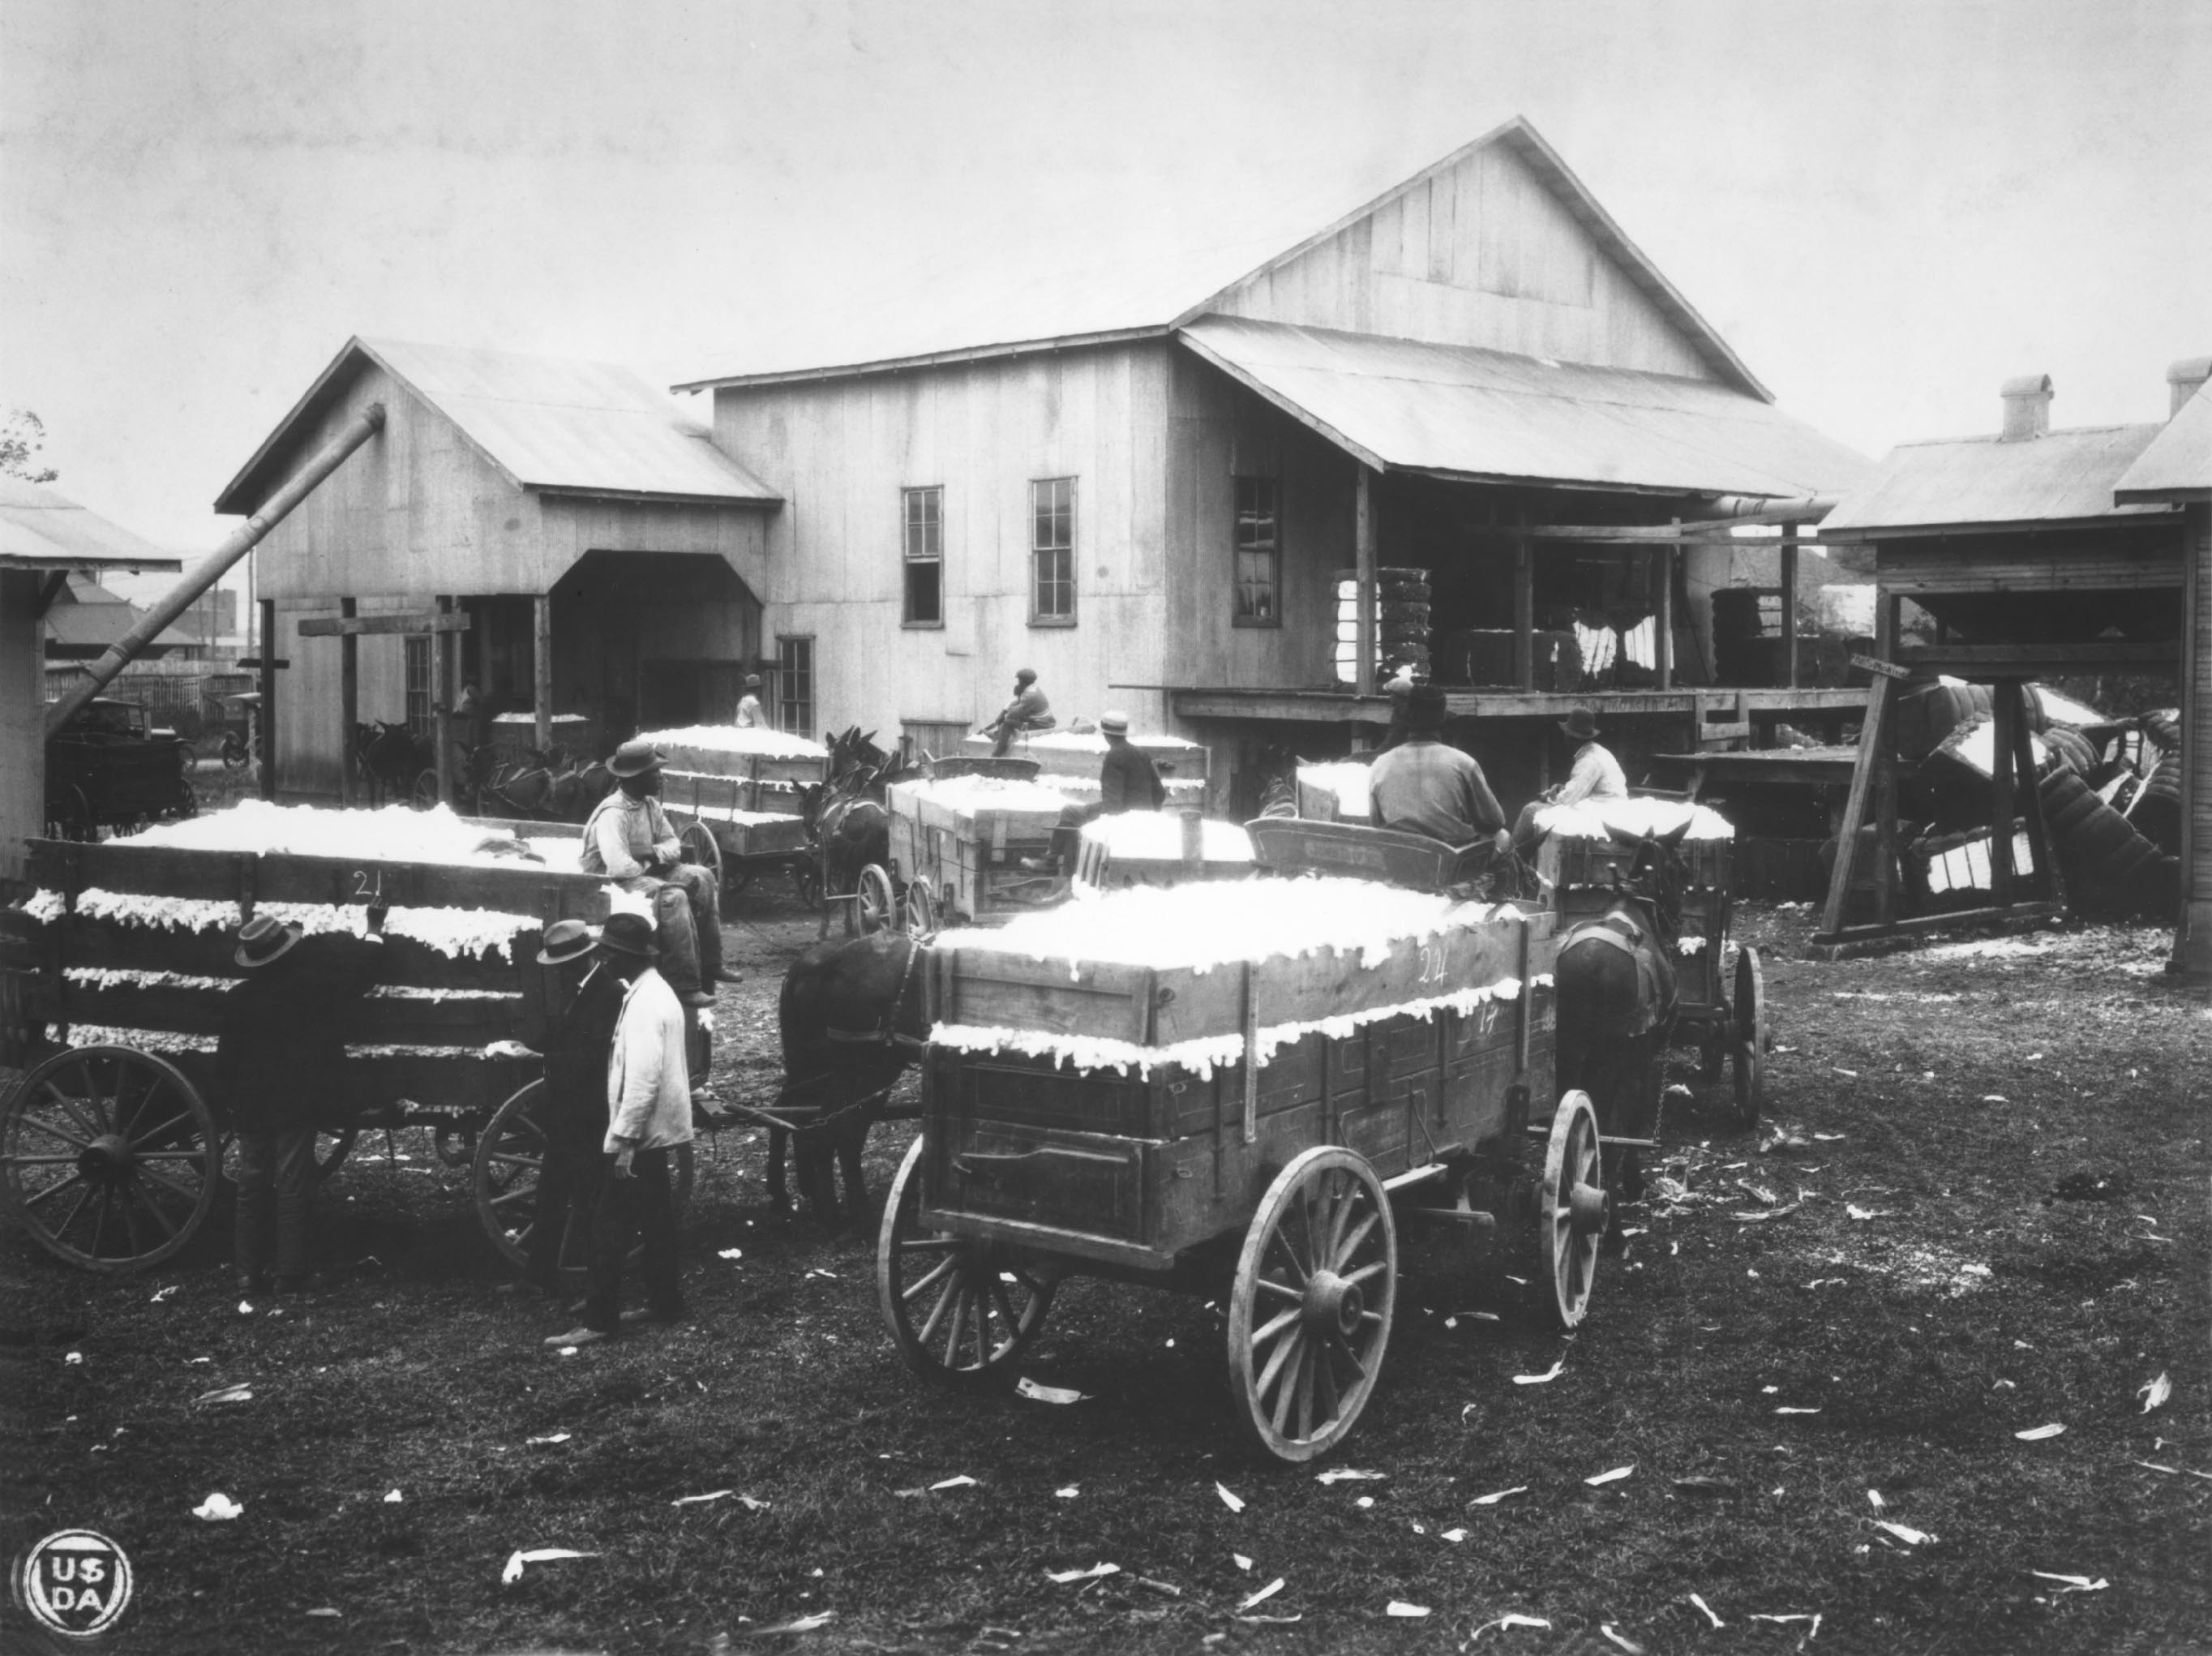 Community cotton gin owned and operated by negroes in Madison County, Alabama in 1923.